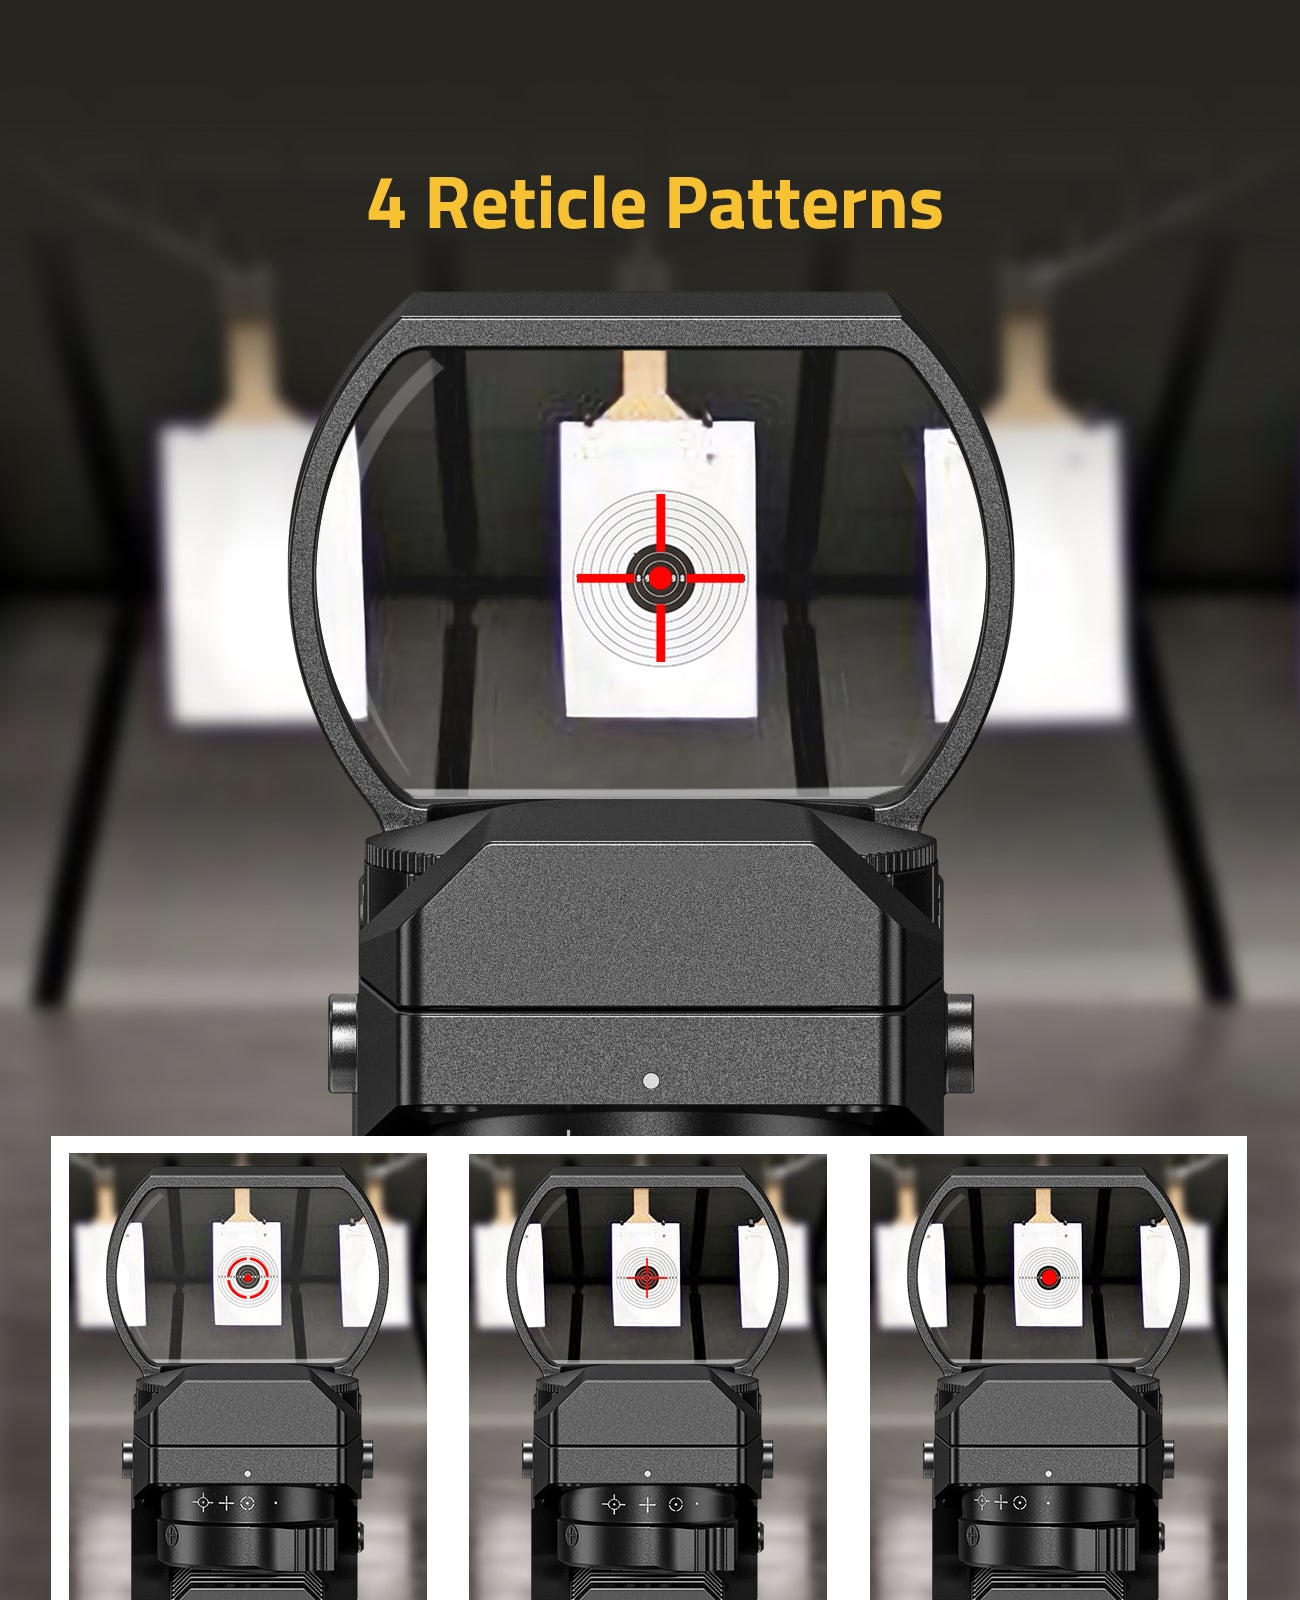 Red Green Dot reflex Sight with 4 Reticle Patterns